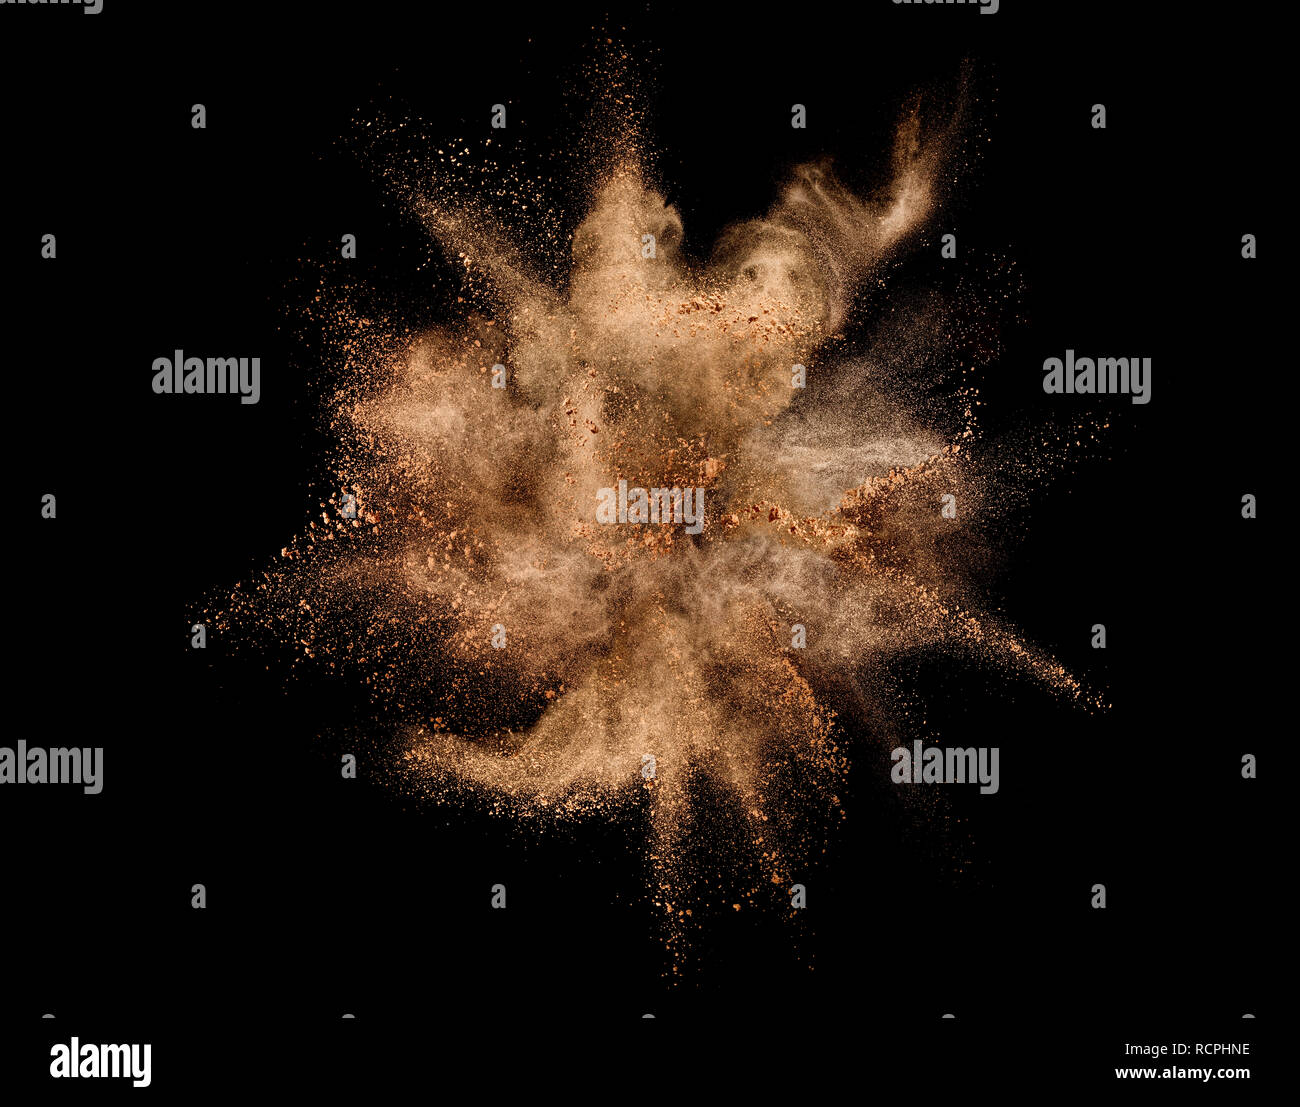 Explosion of brown powder on black background. Stock Photo